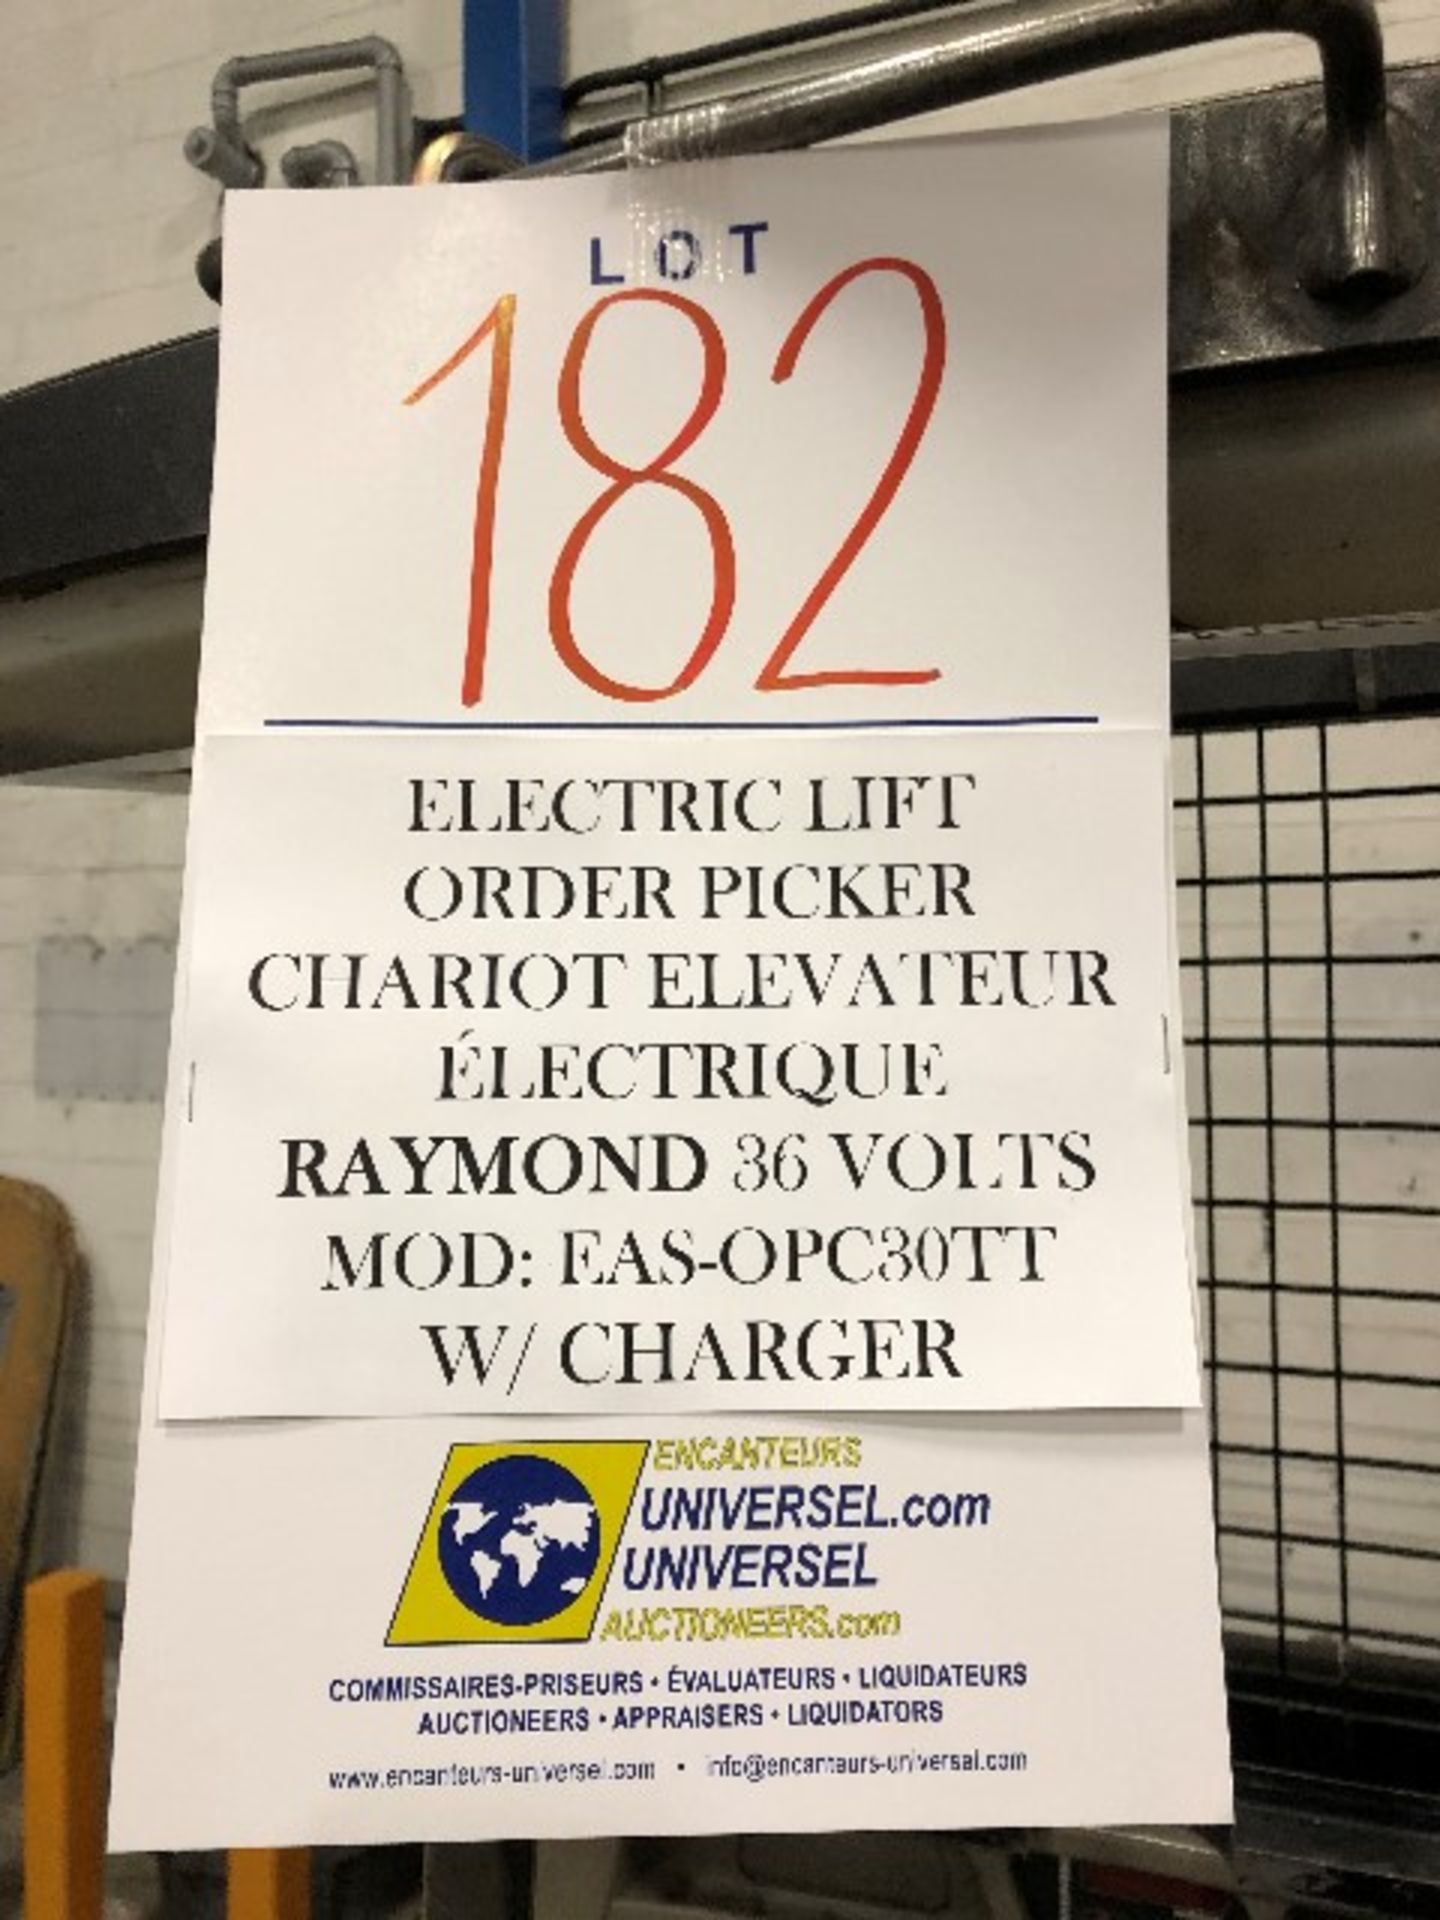 Raymond EASI-OP30TT Electric lift order picker w/charger, 36 volts - Image 8 of 8